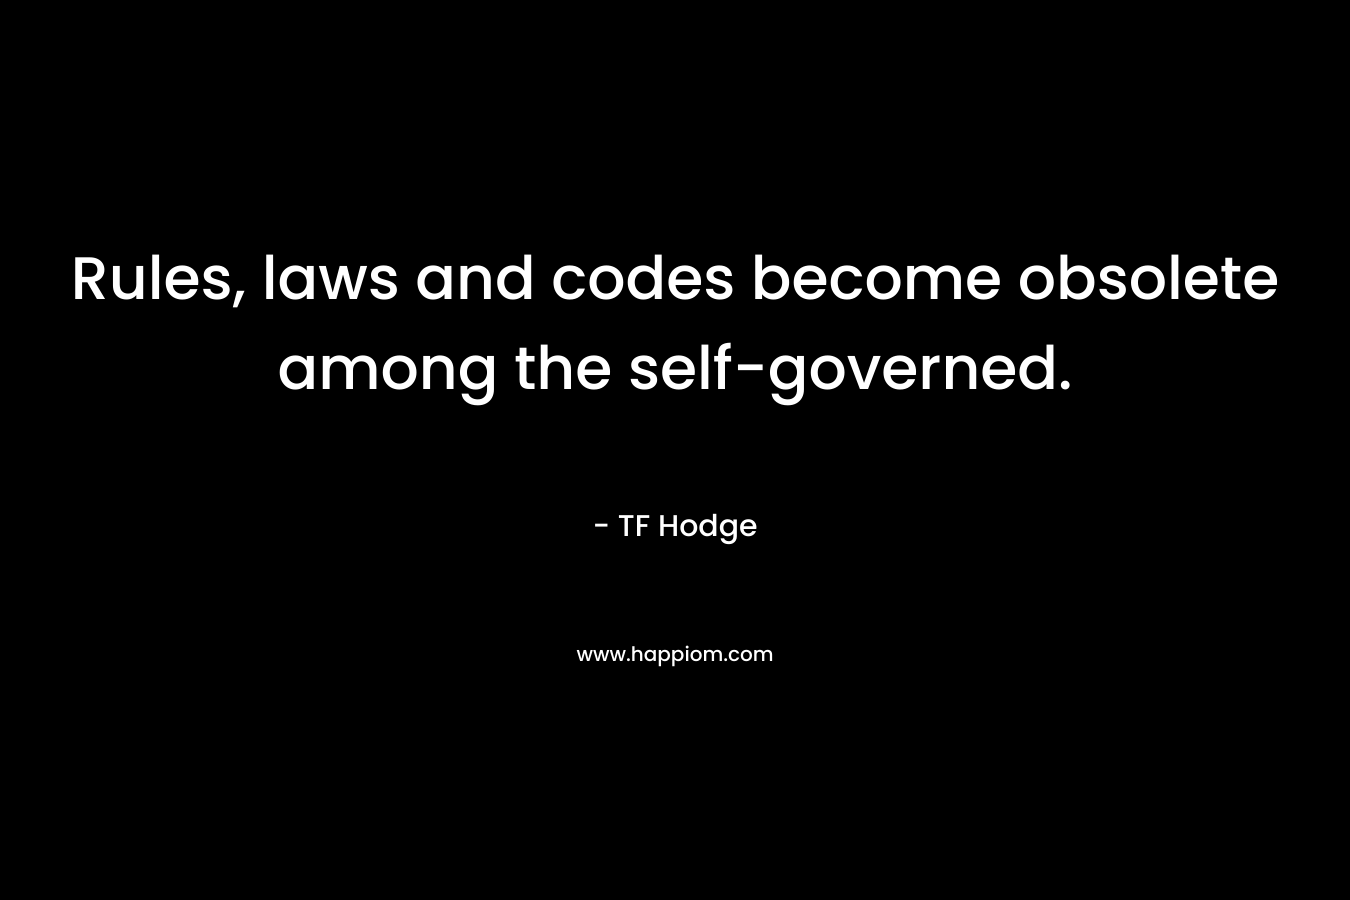 Rules, laws and codes become obsolete among the self-governed. – TF Hodge